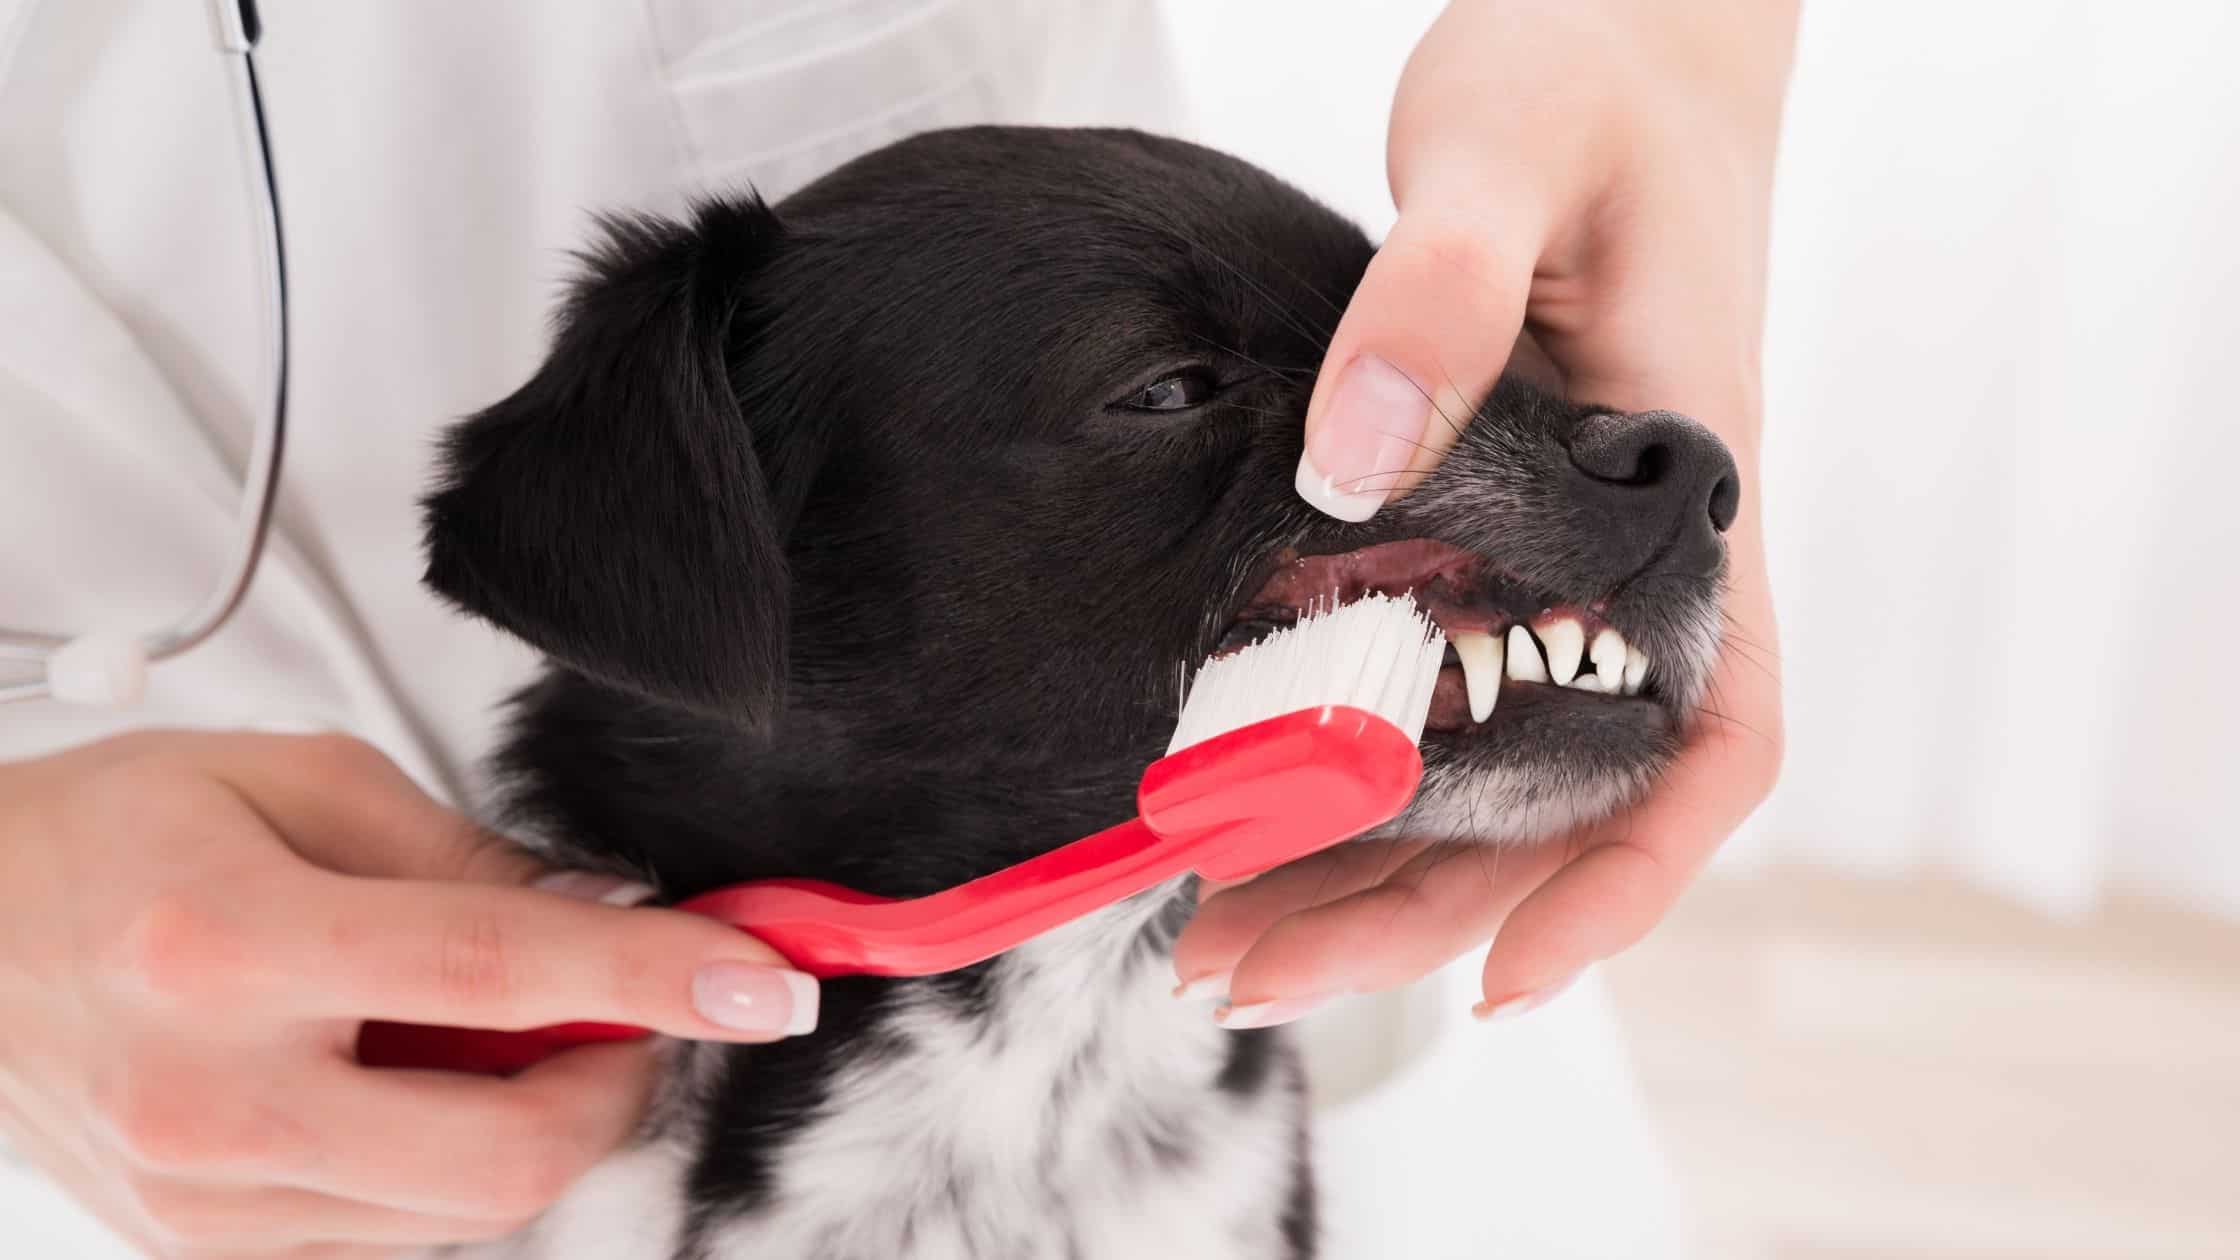 A dog who has dog dental insurance getting his teeth brushed